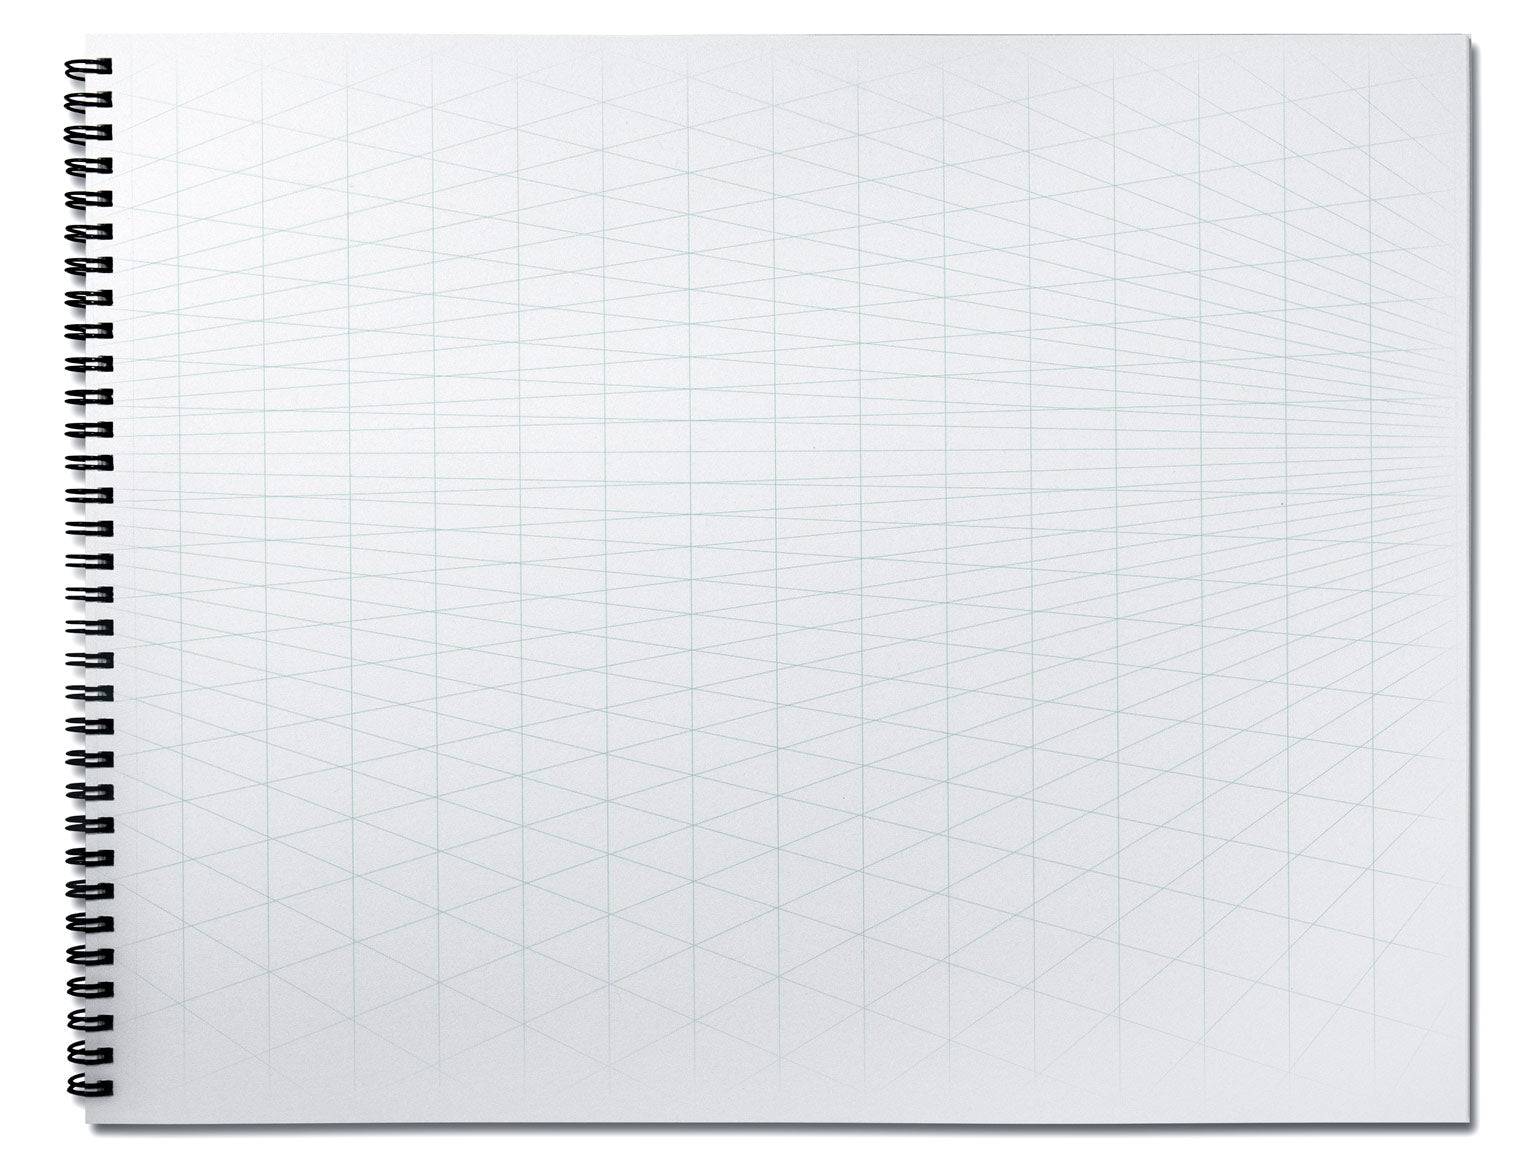 Koala Tools - 40-Page Large Drawing Pad for 1-Point Perspective Drawing,  Sketch